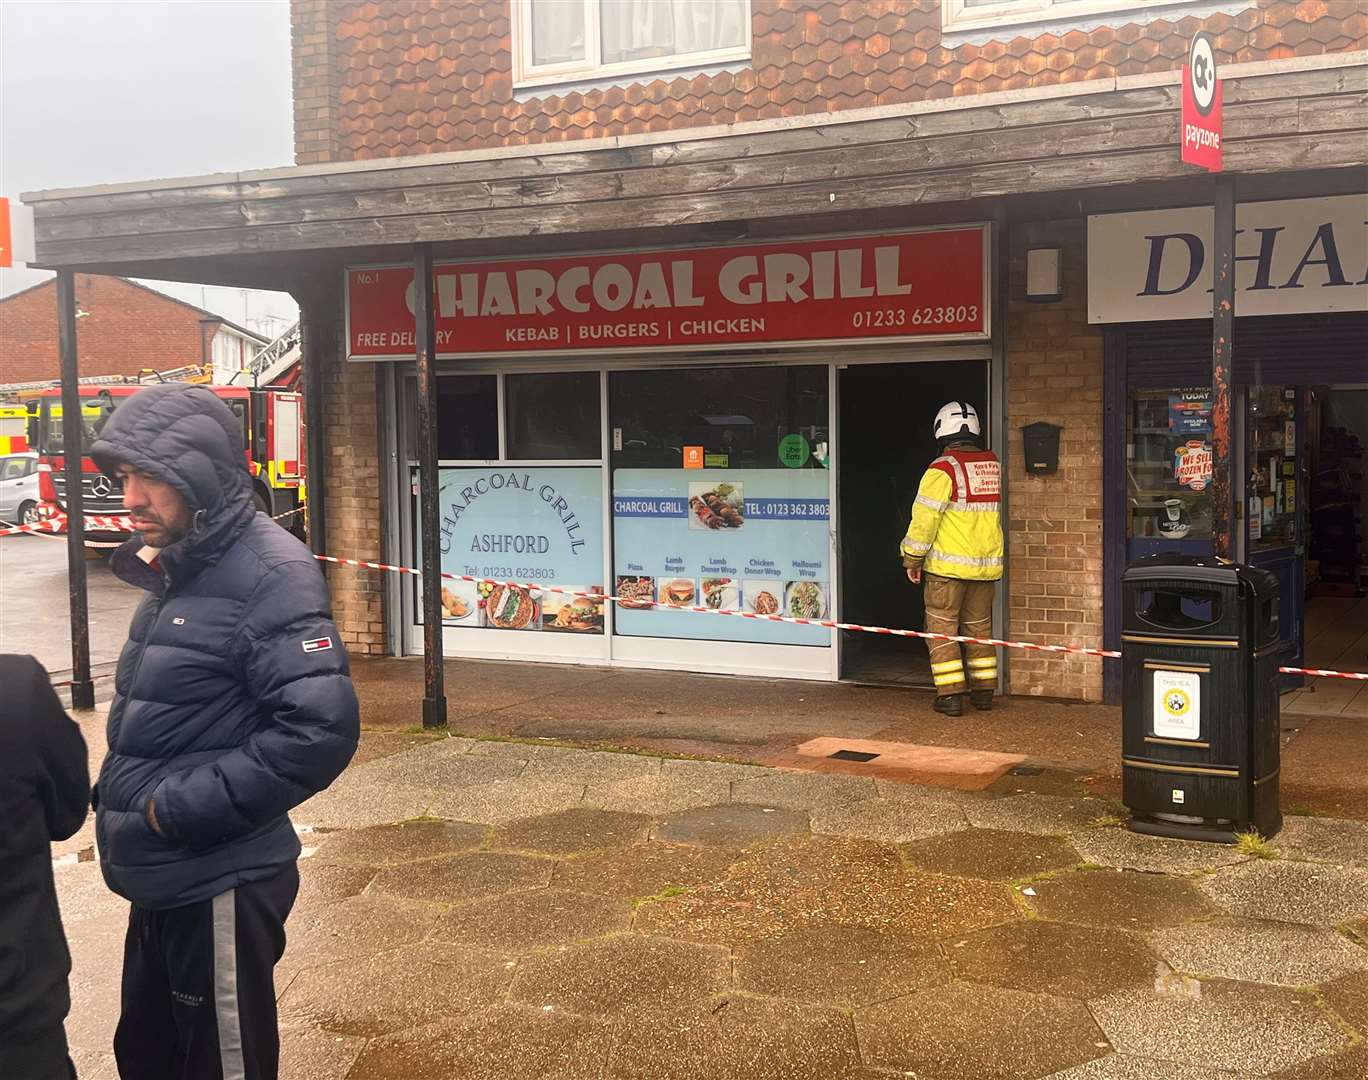 The blaze is at Charcoal Grill. Picture: Steve Salter